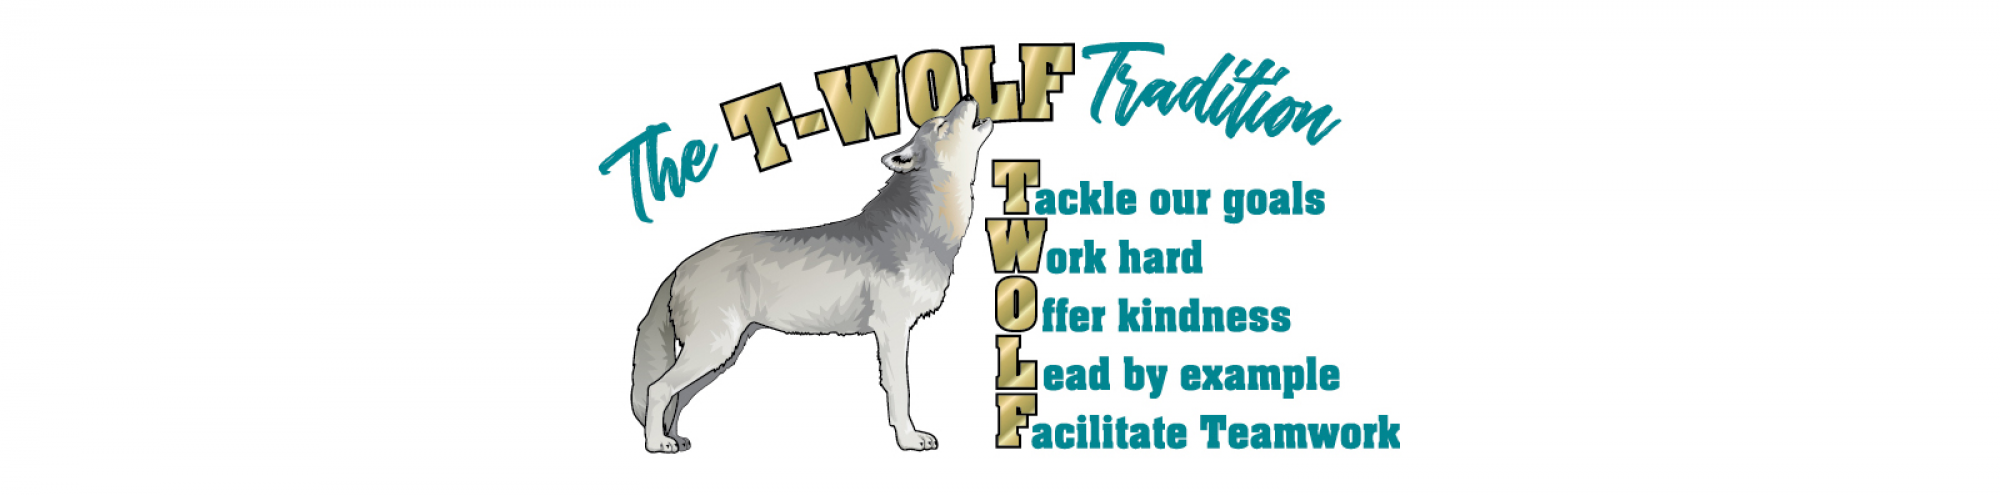 The T-WOLF Tradition Banner